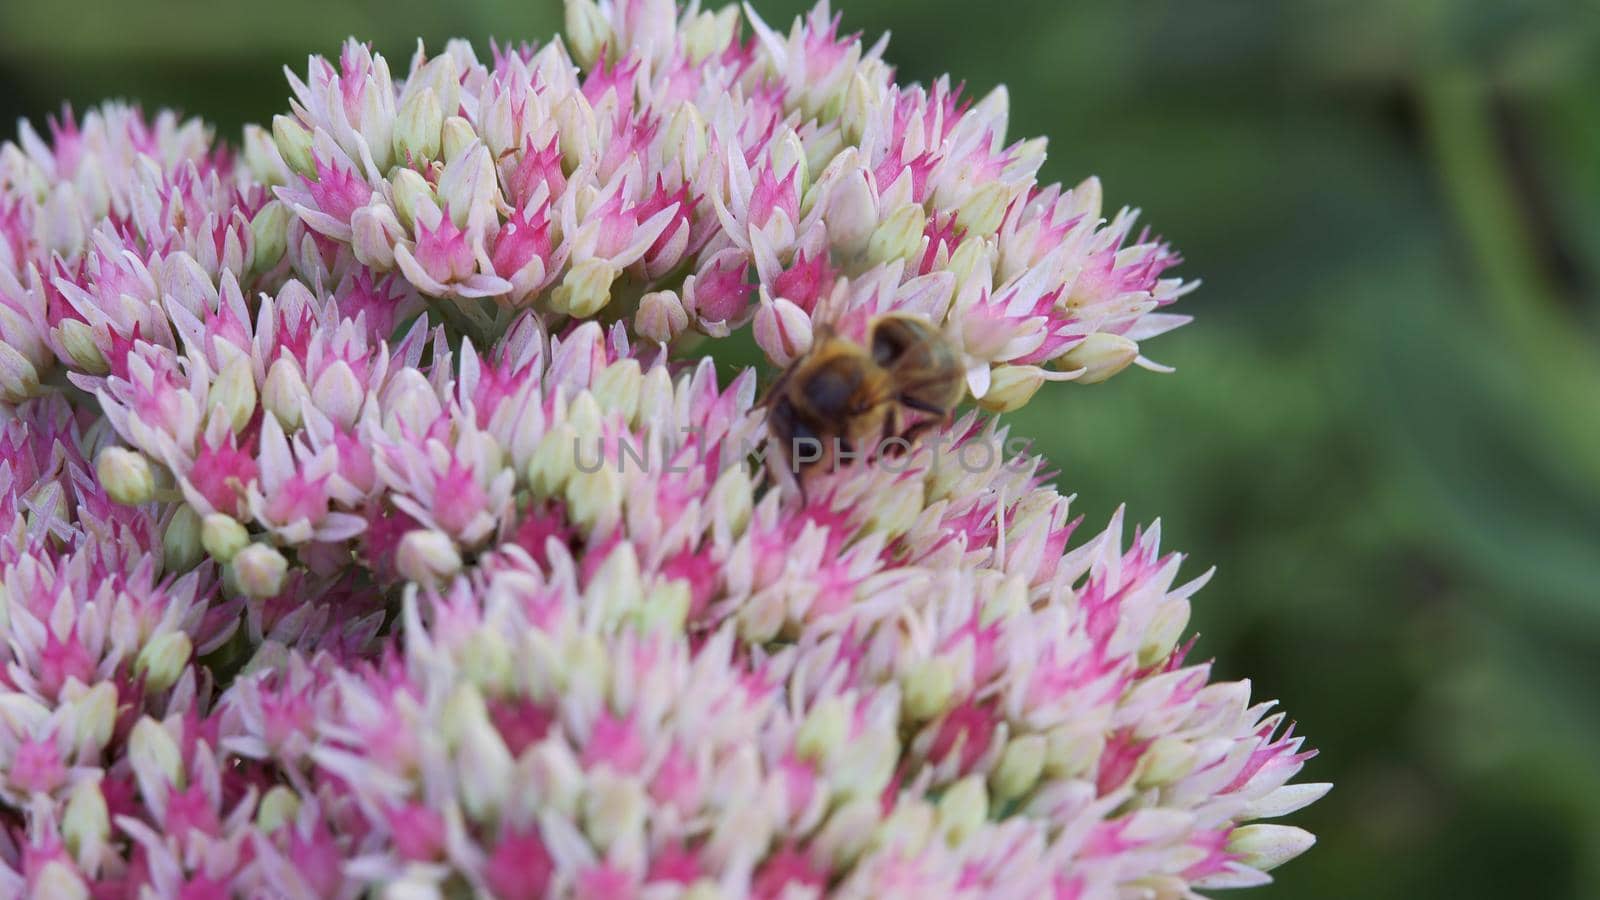 Inflorescence of a flowering plant, a prominent Ochitok. Sedum spectabile Boreau. Crassulaceae autumn. An adult solitary bee collects pollen from an autumn garden flower of white and pink color.